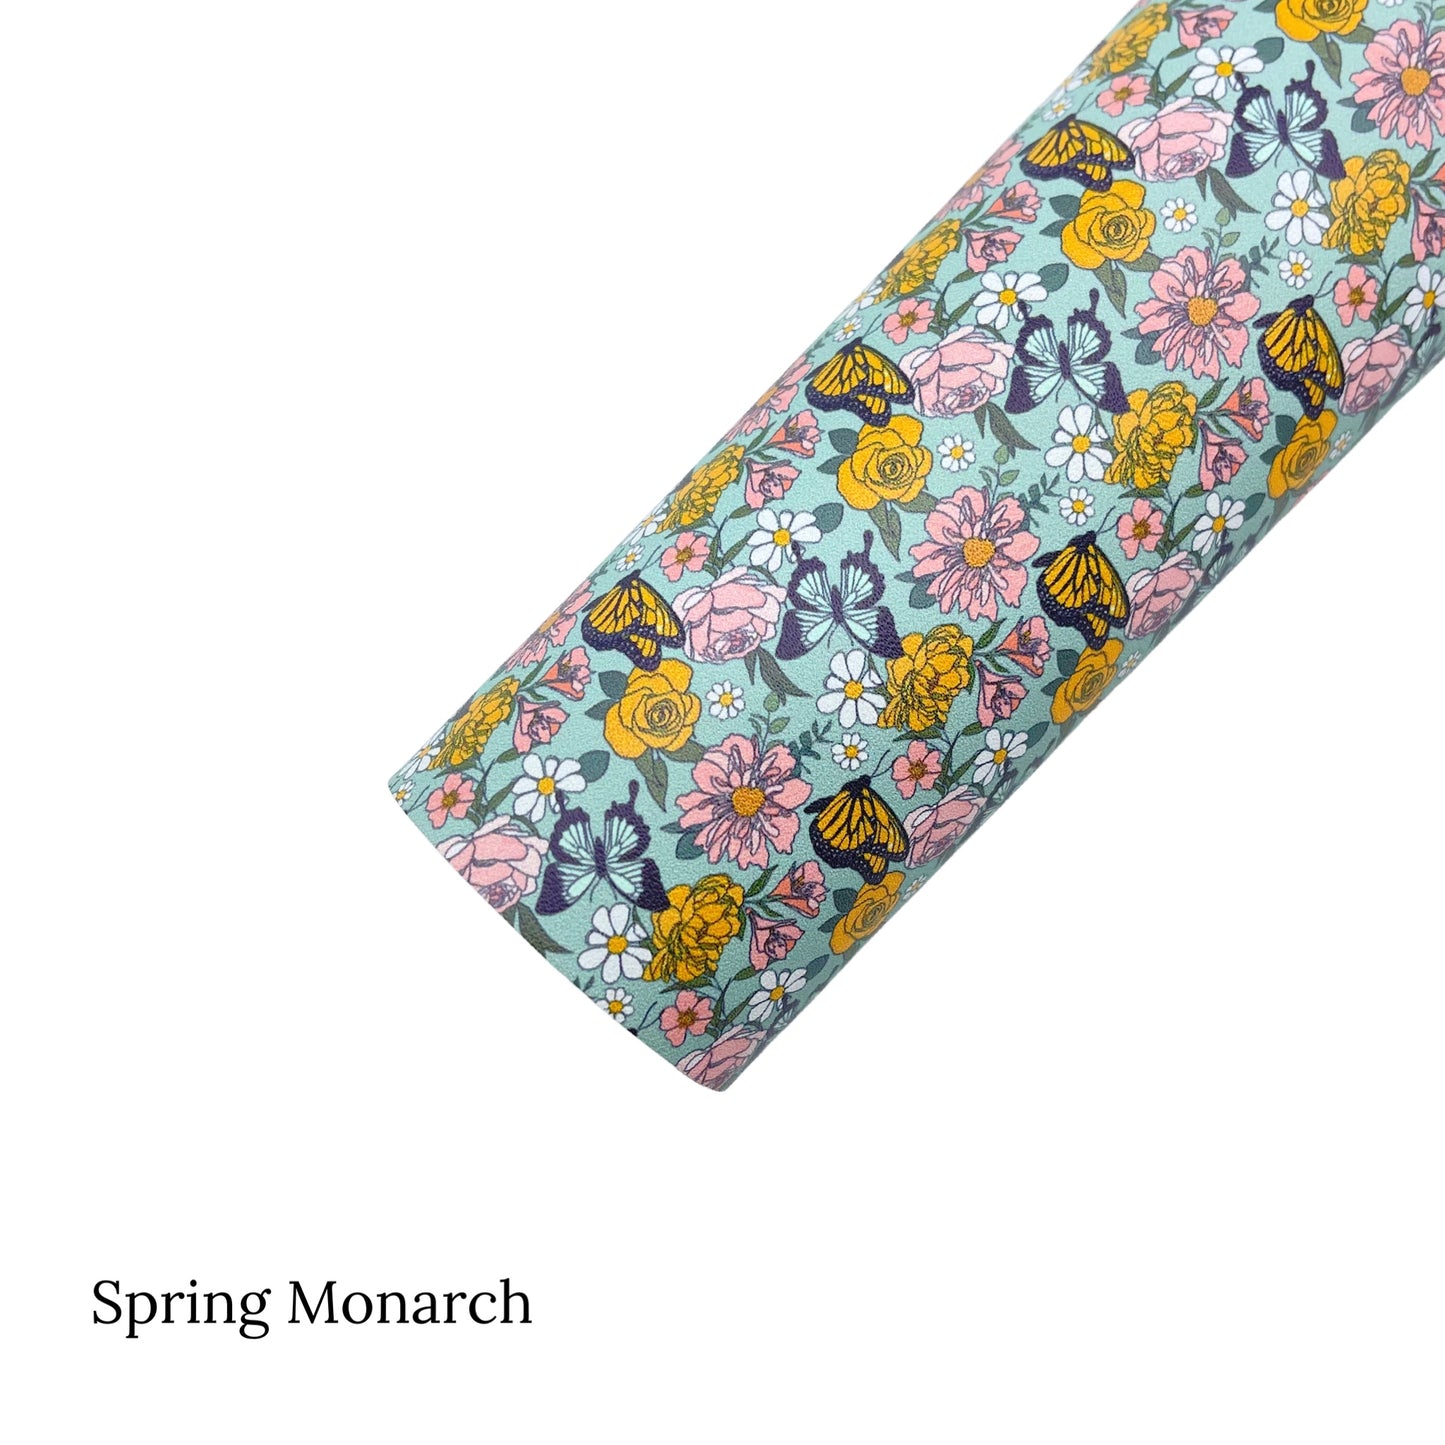 Spring meadow pattern faux leather sheets. Spring monarch pattern faux leather sheet.